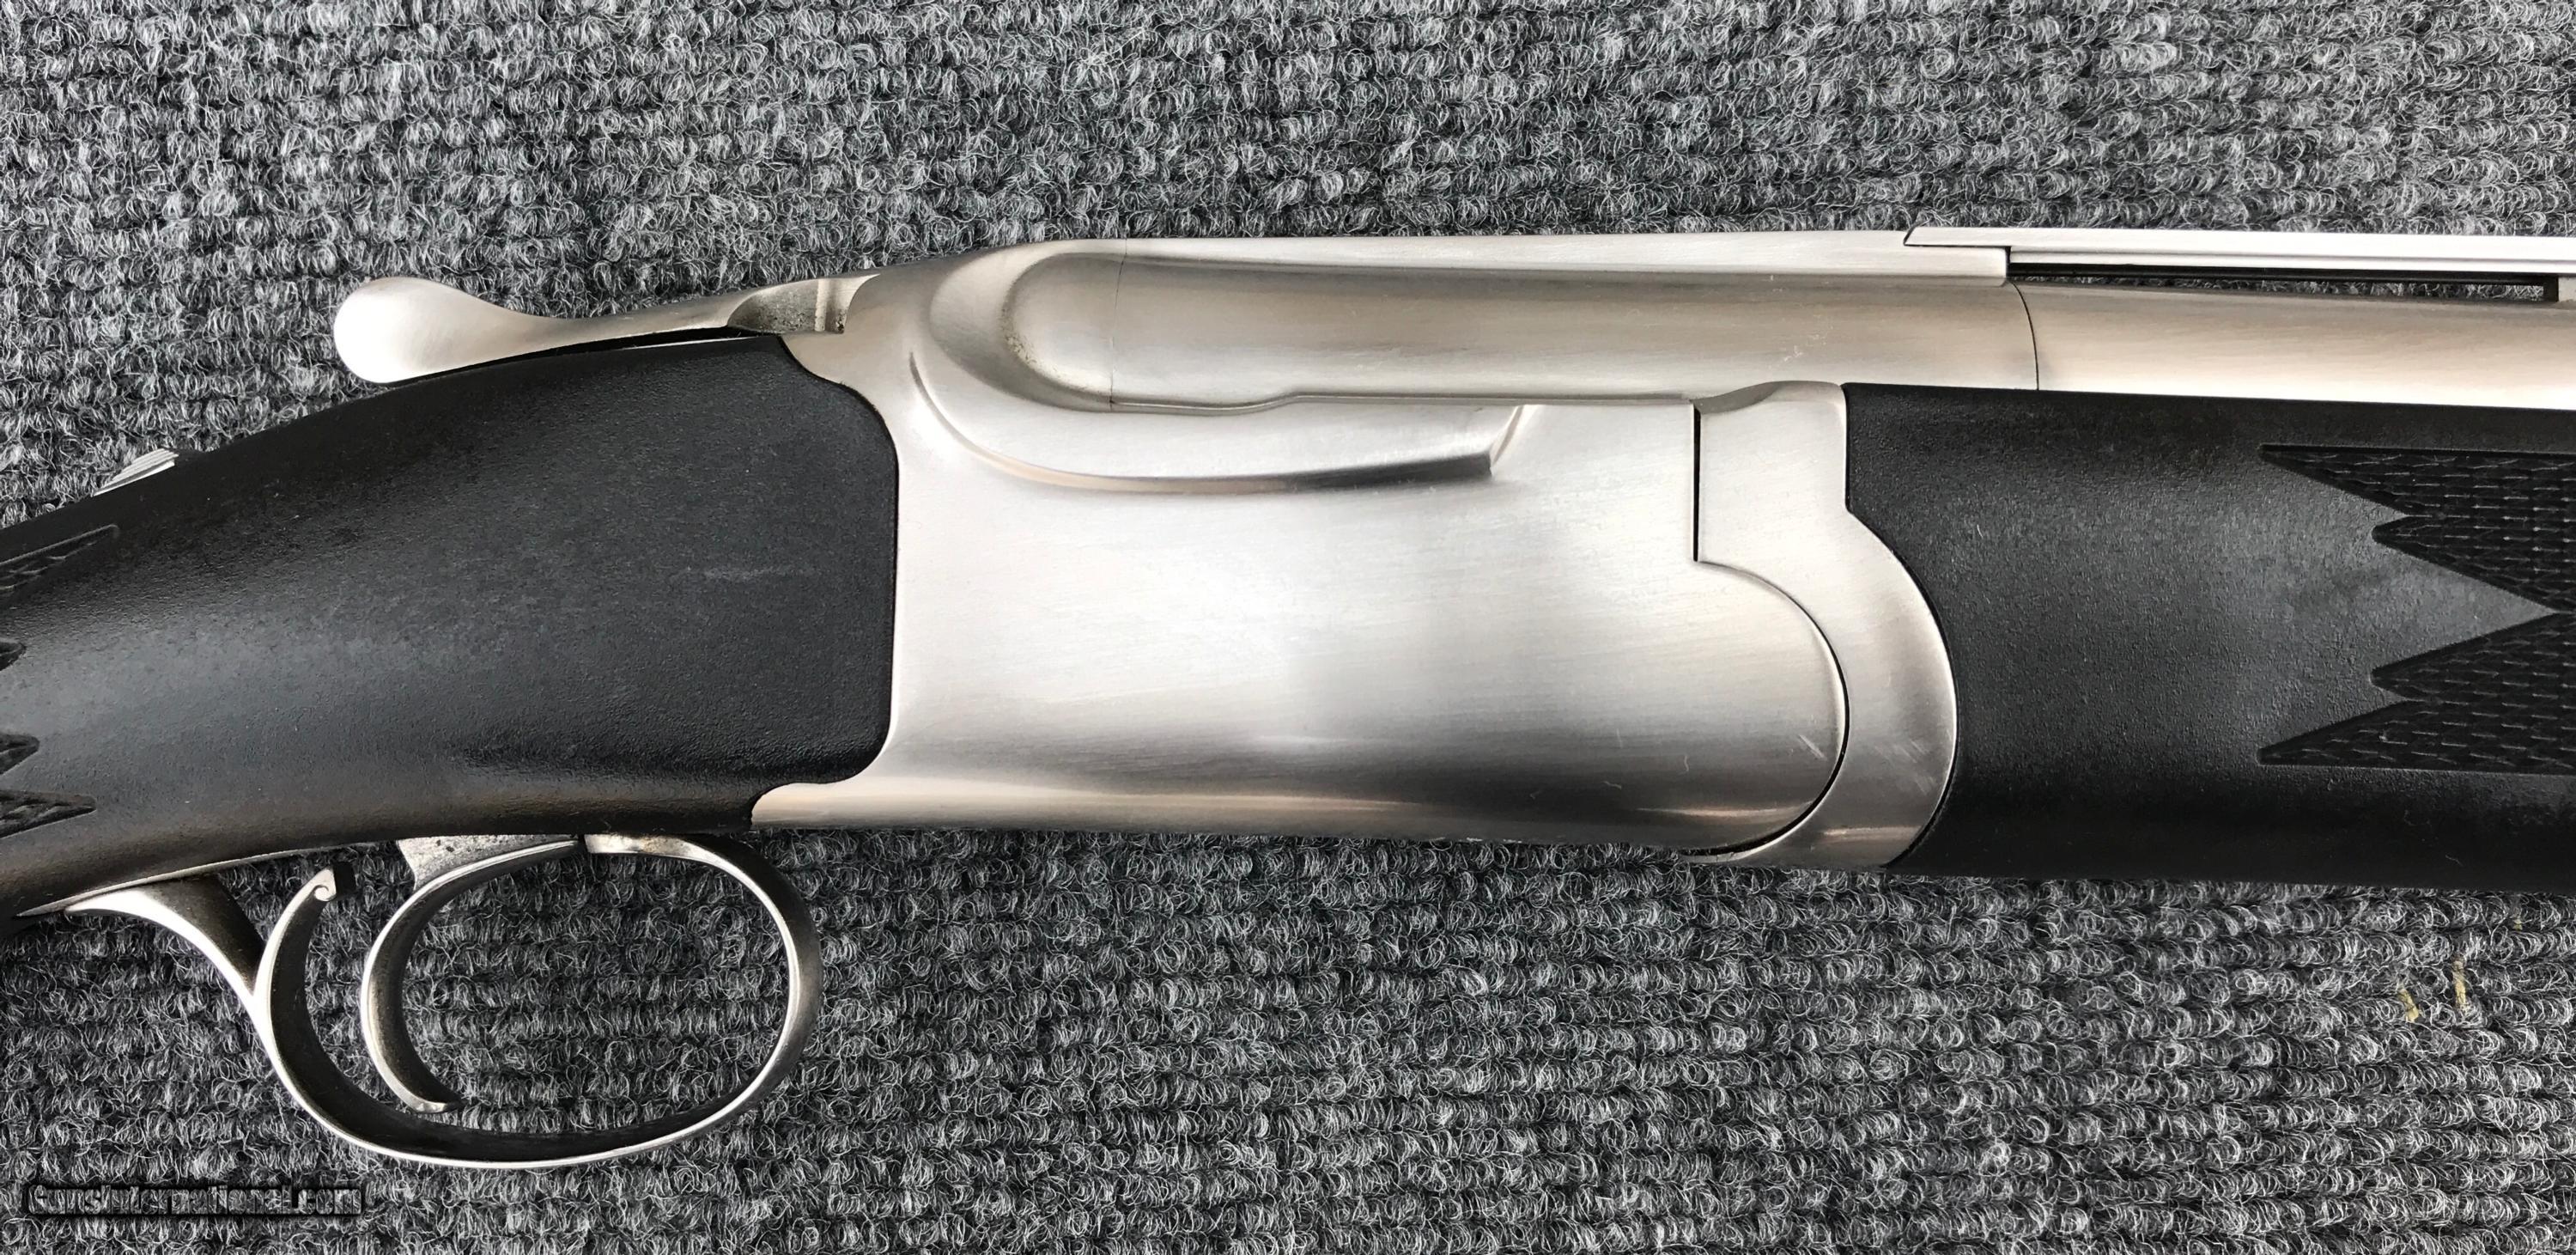 Ruger red label STAINLESS all weather 12 gauge